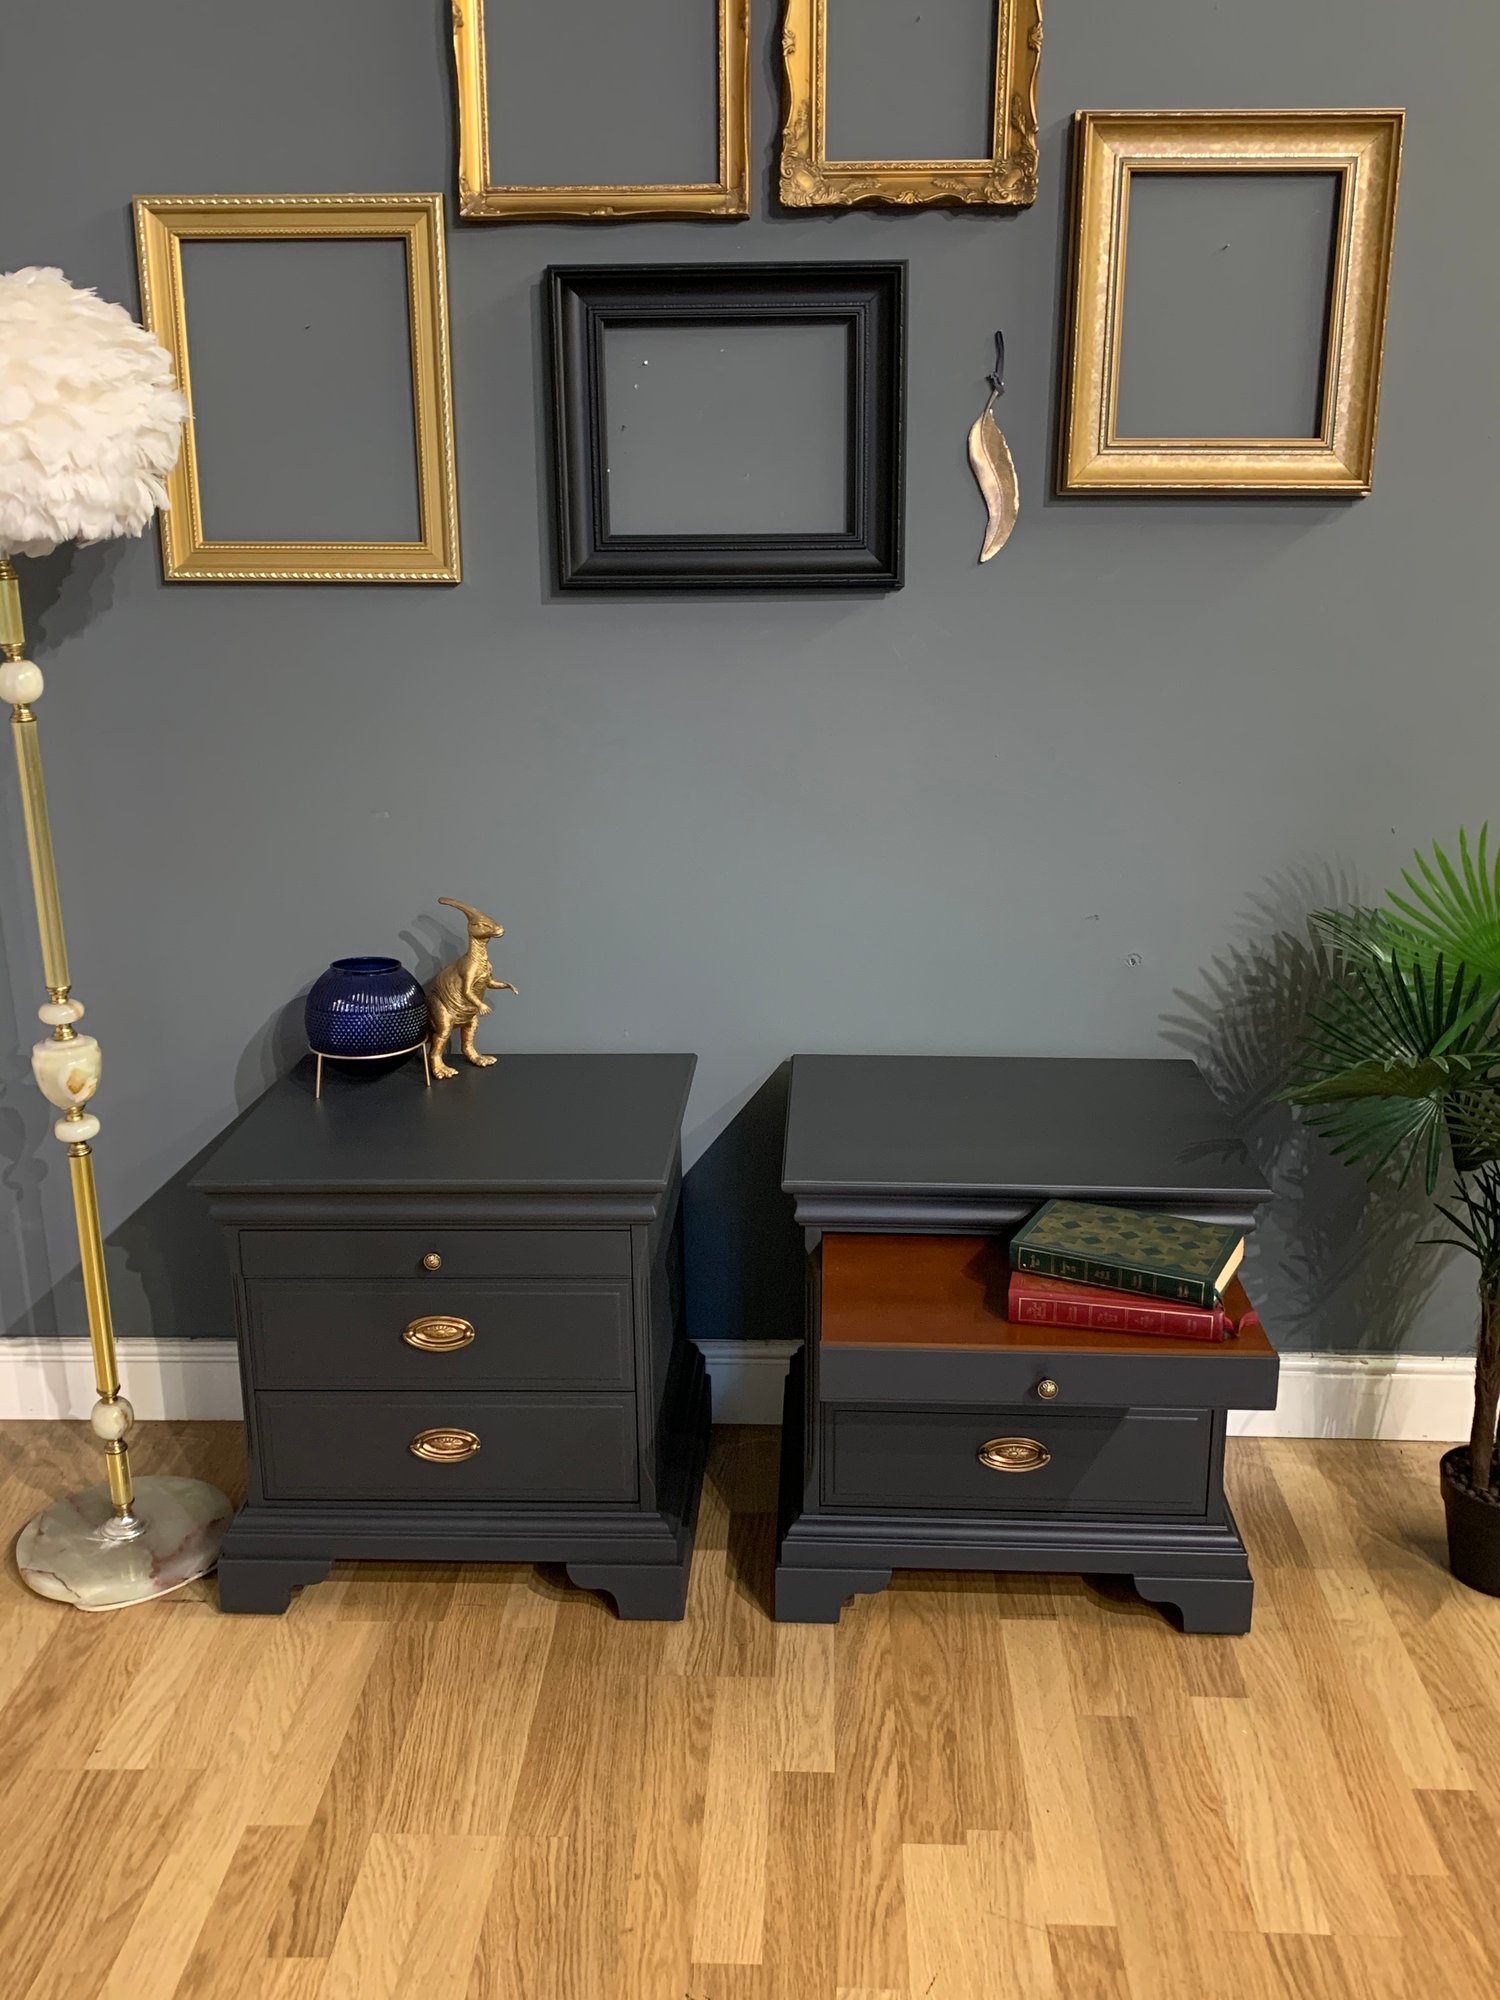 Image of A pair of mahogany Stag bedside tables in dark grey.